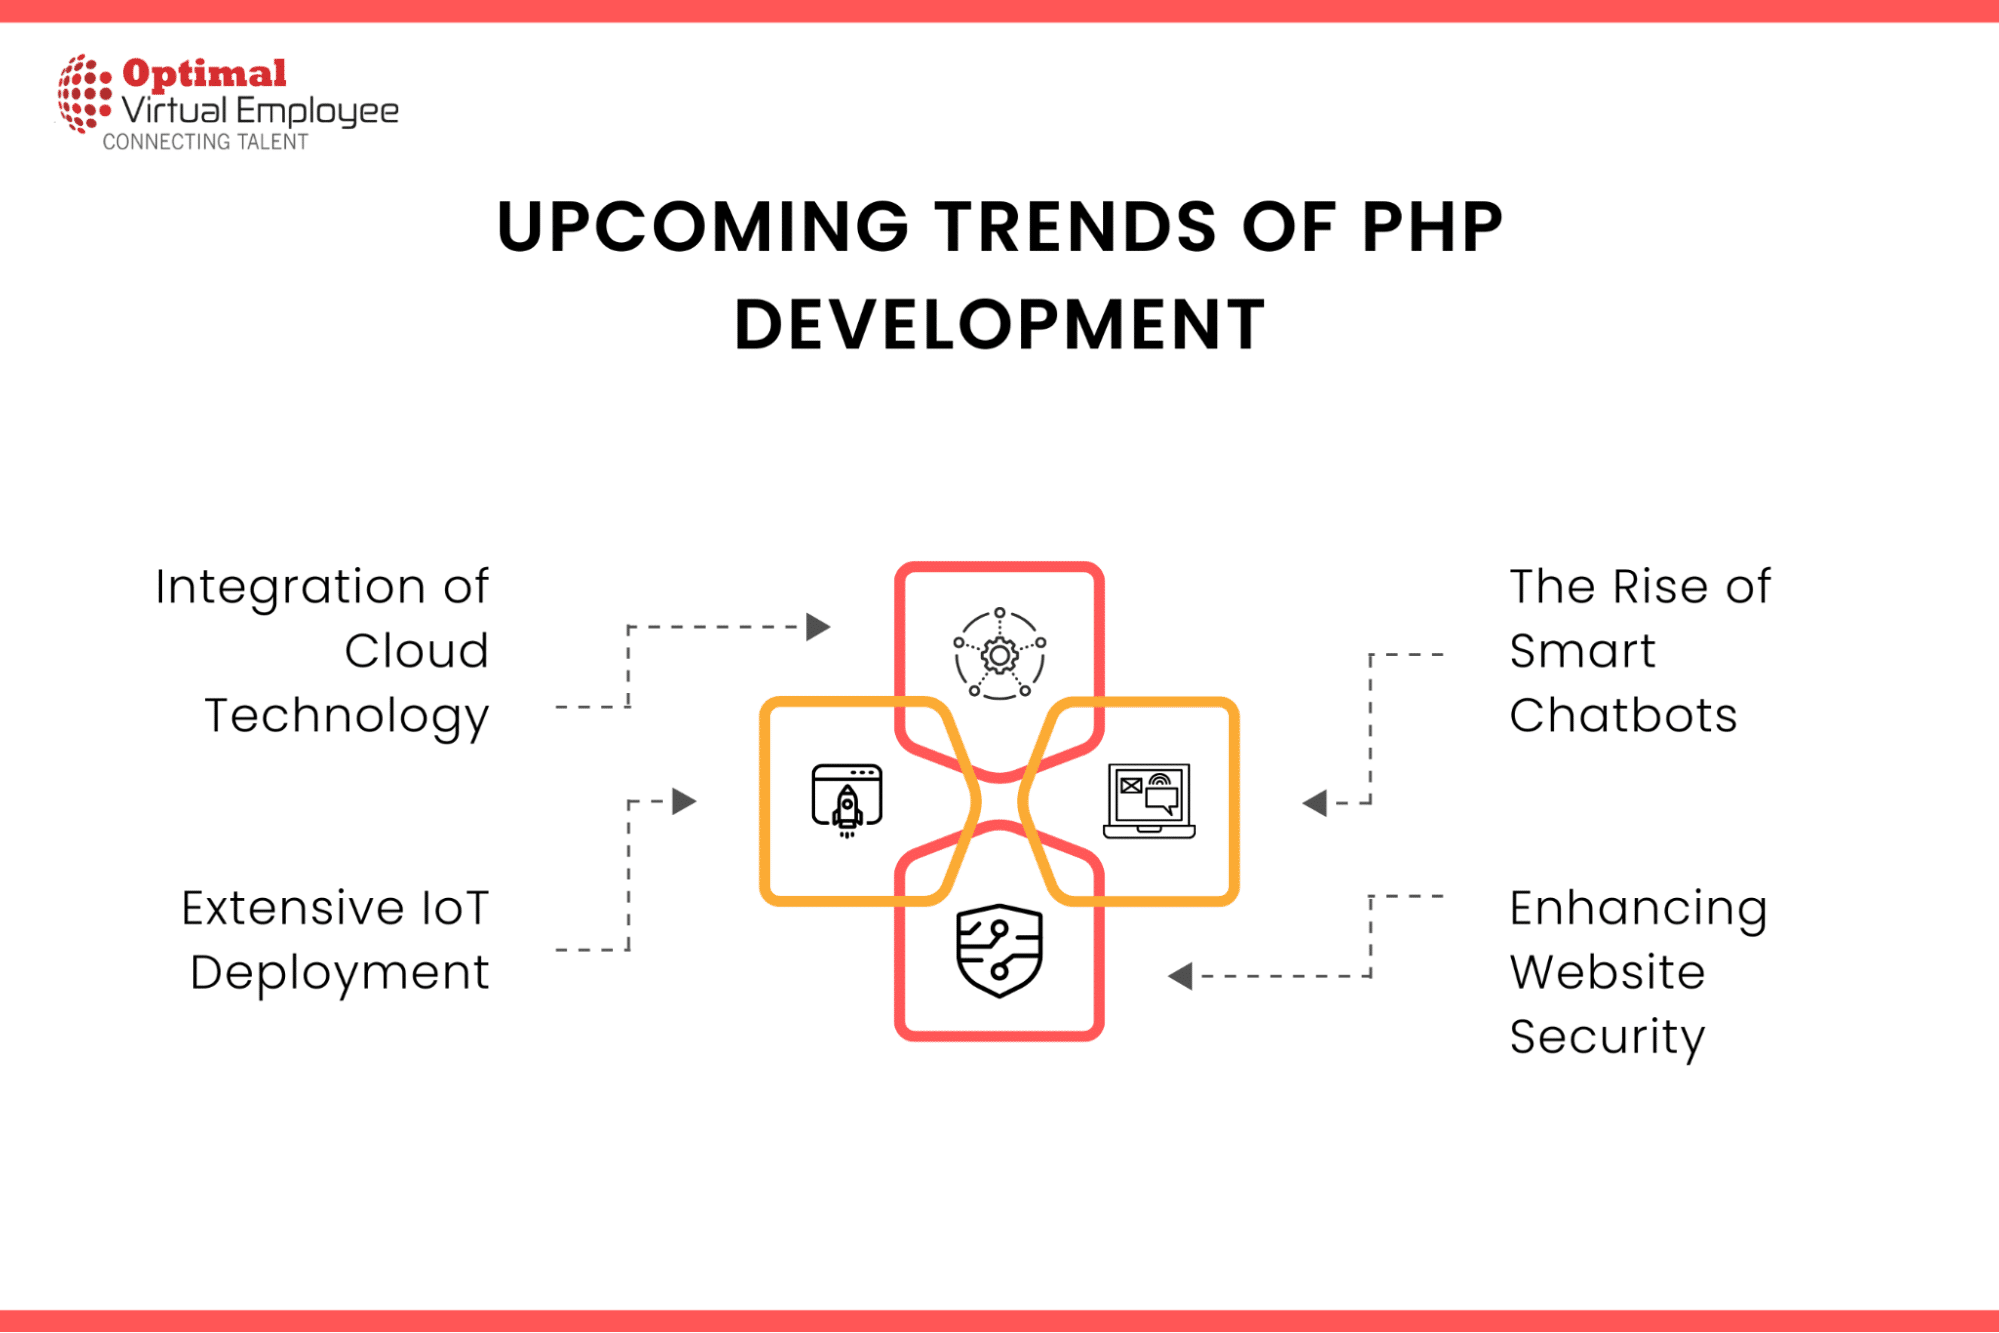 What are the Upcoming Trends of PHP Development in 2023